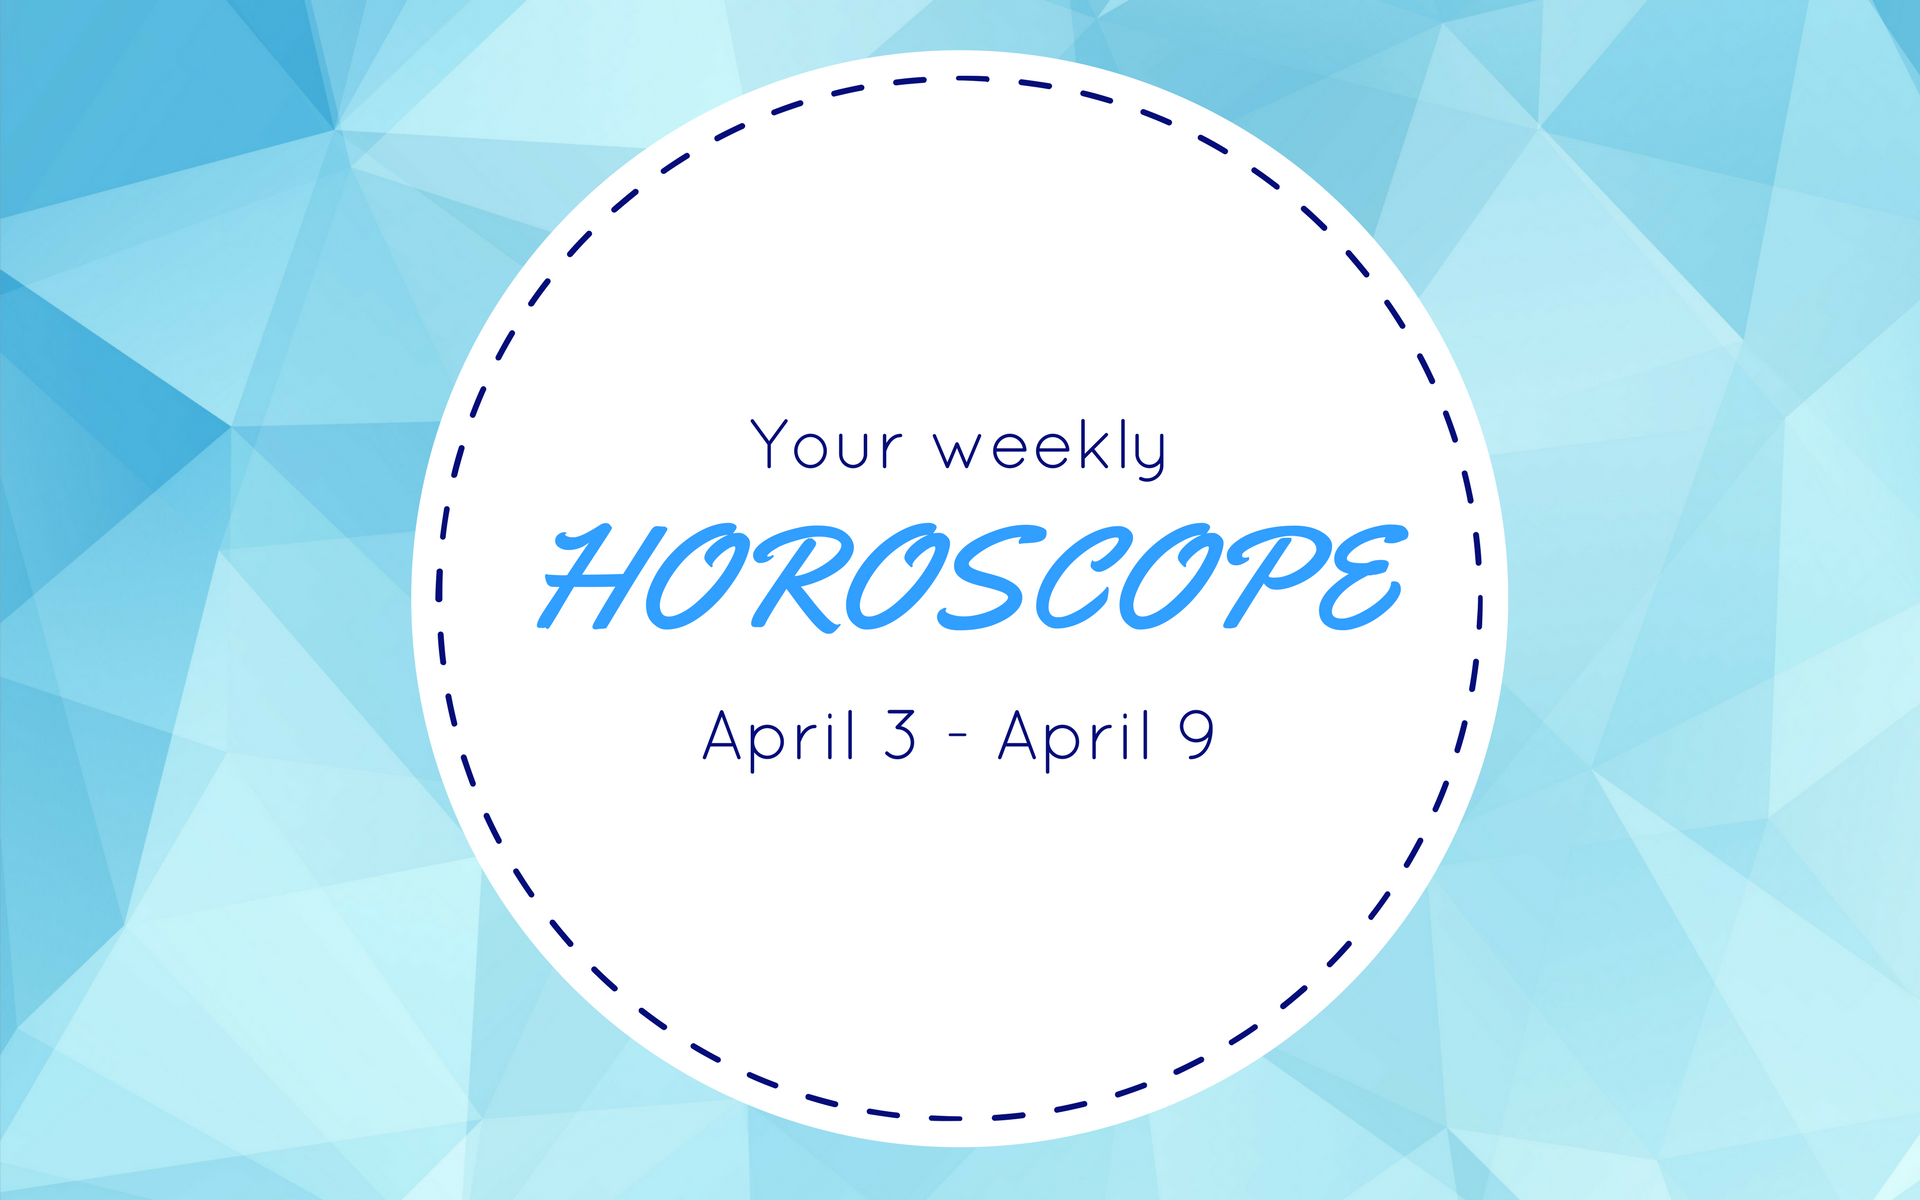 Your Weekly Horoscope: April 3 - April 9